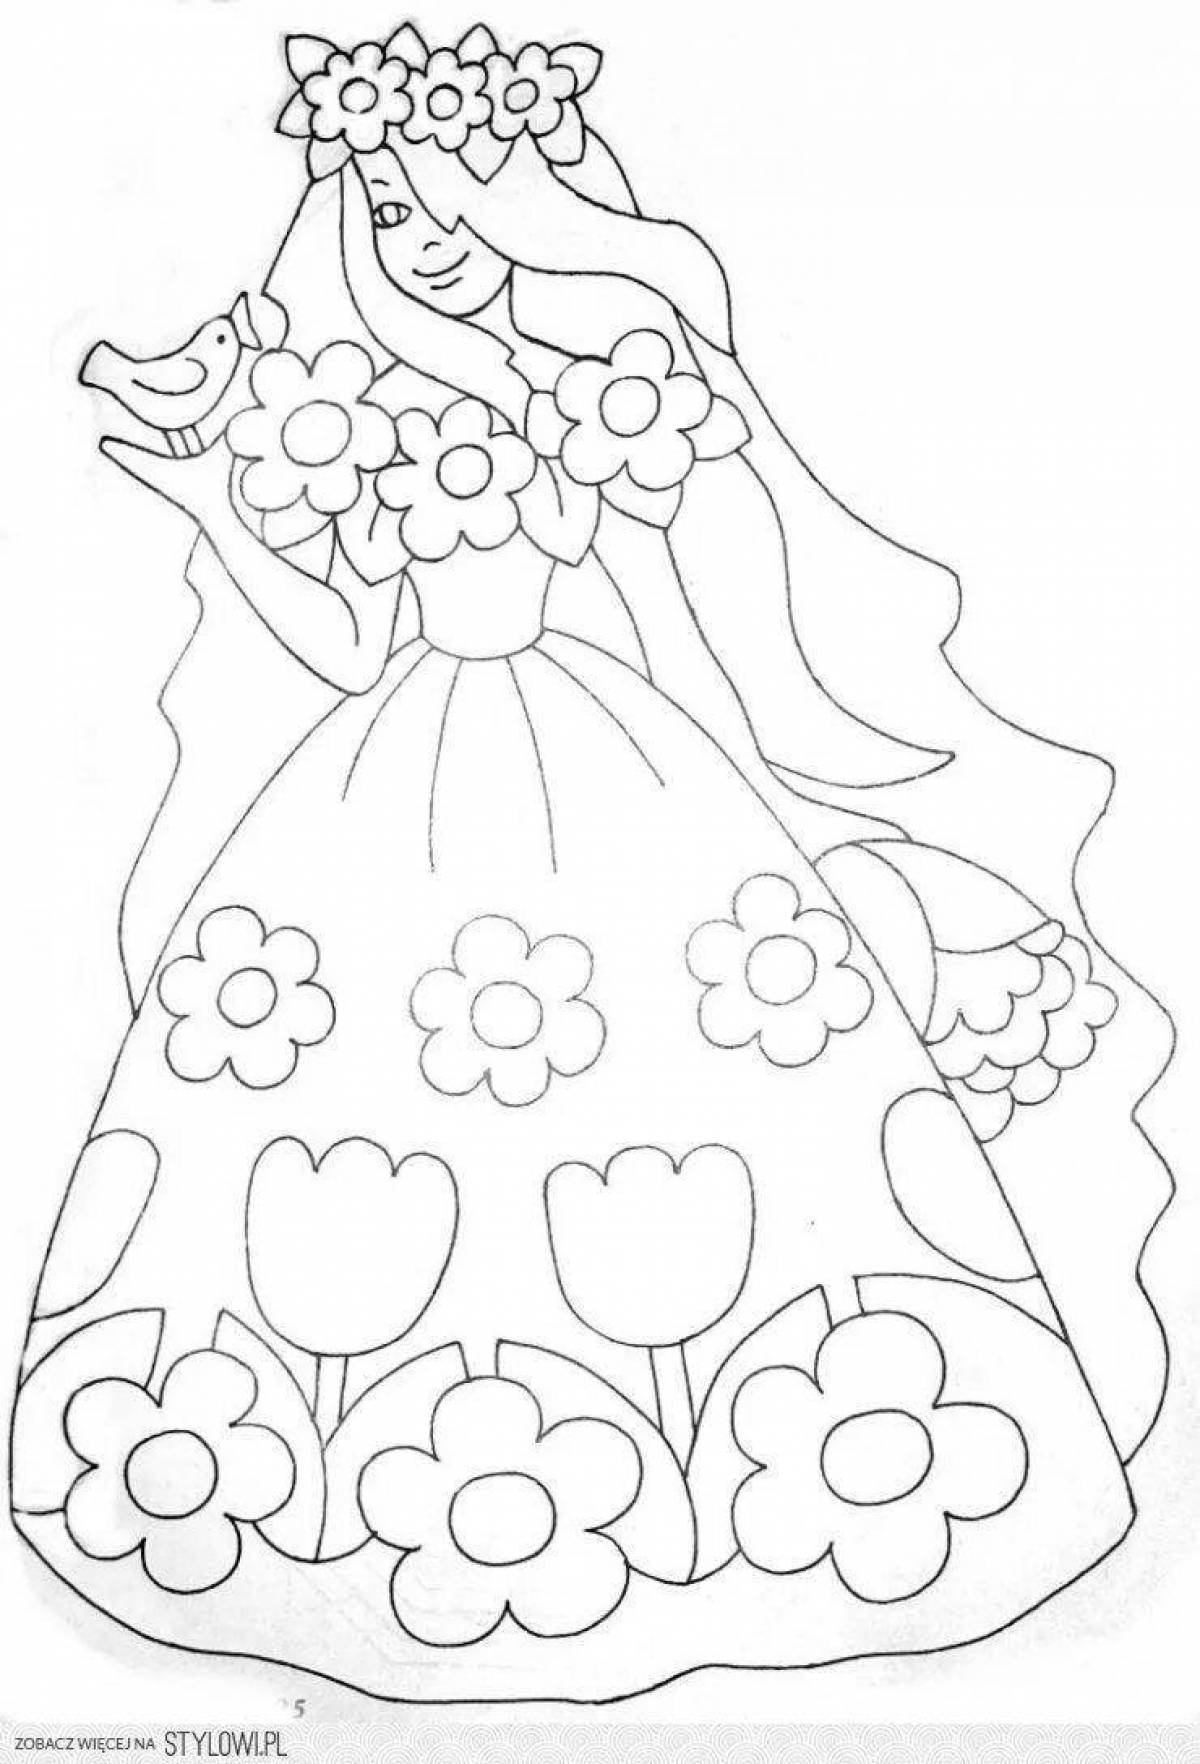 Fascinating coloring book for girls